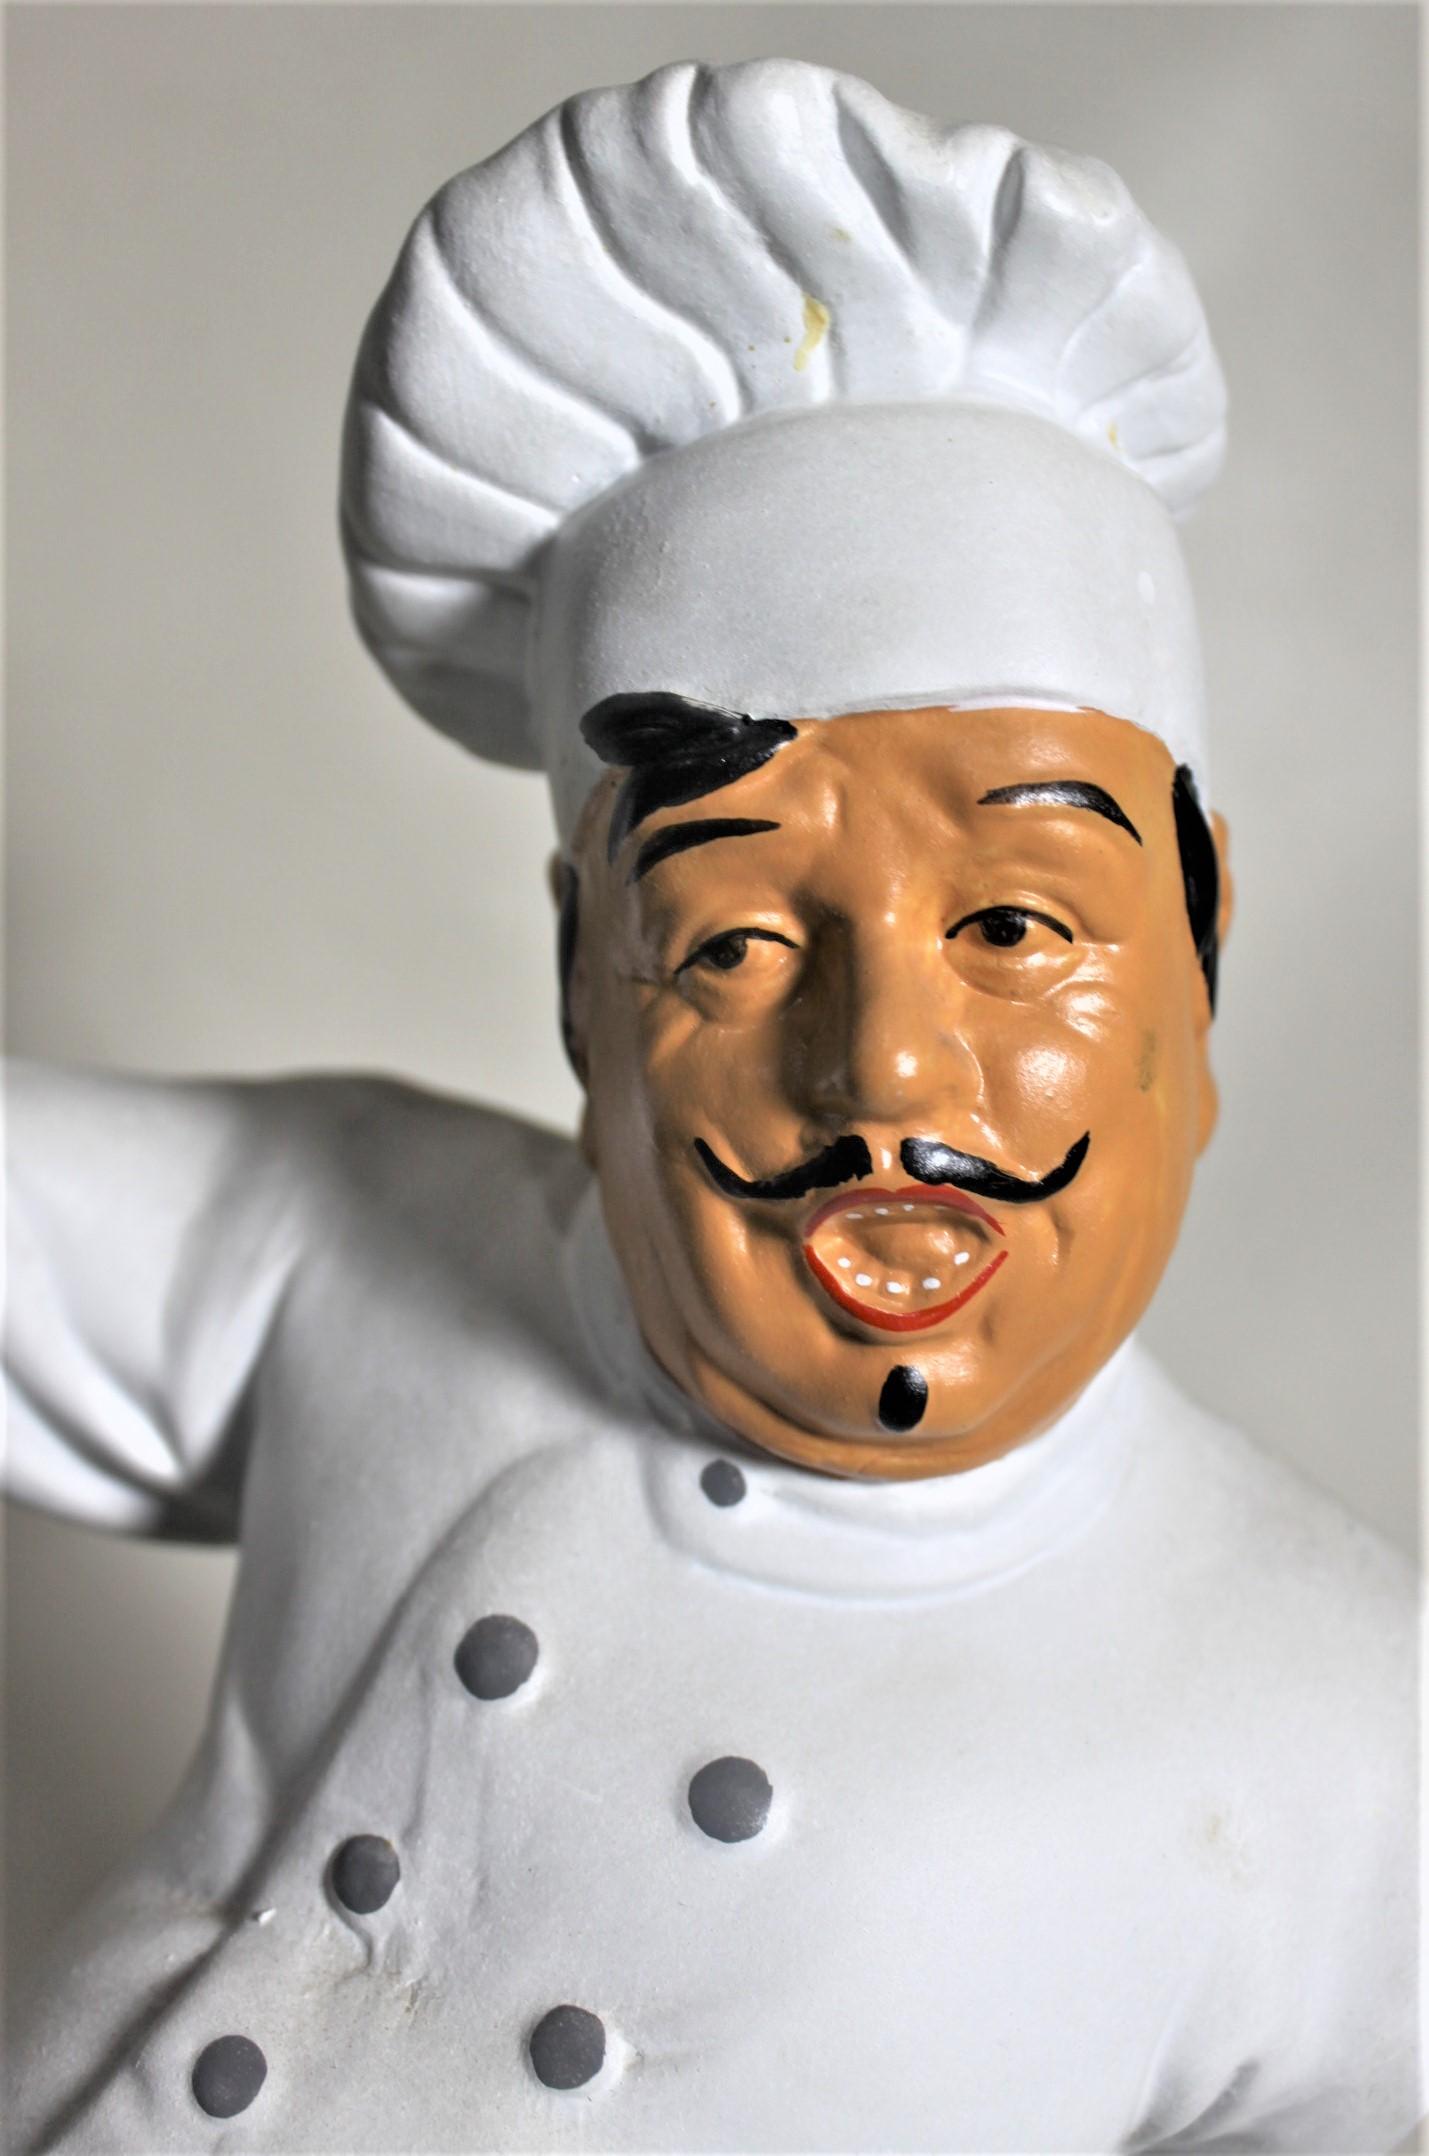 Molded Vintage Whimsical Chalkware French or Italian Falling Chef Figurine or Sculpture For Sale